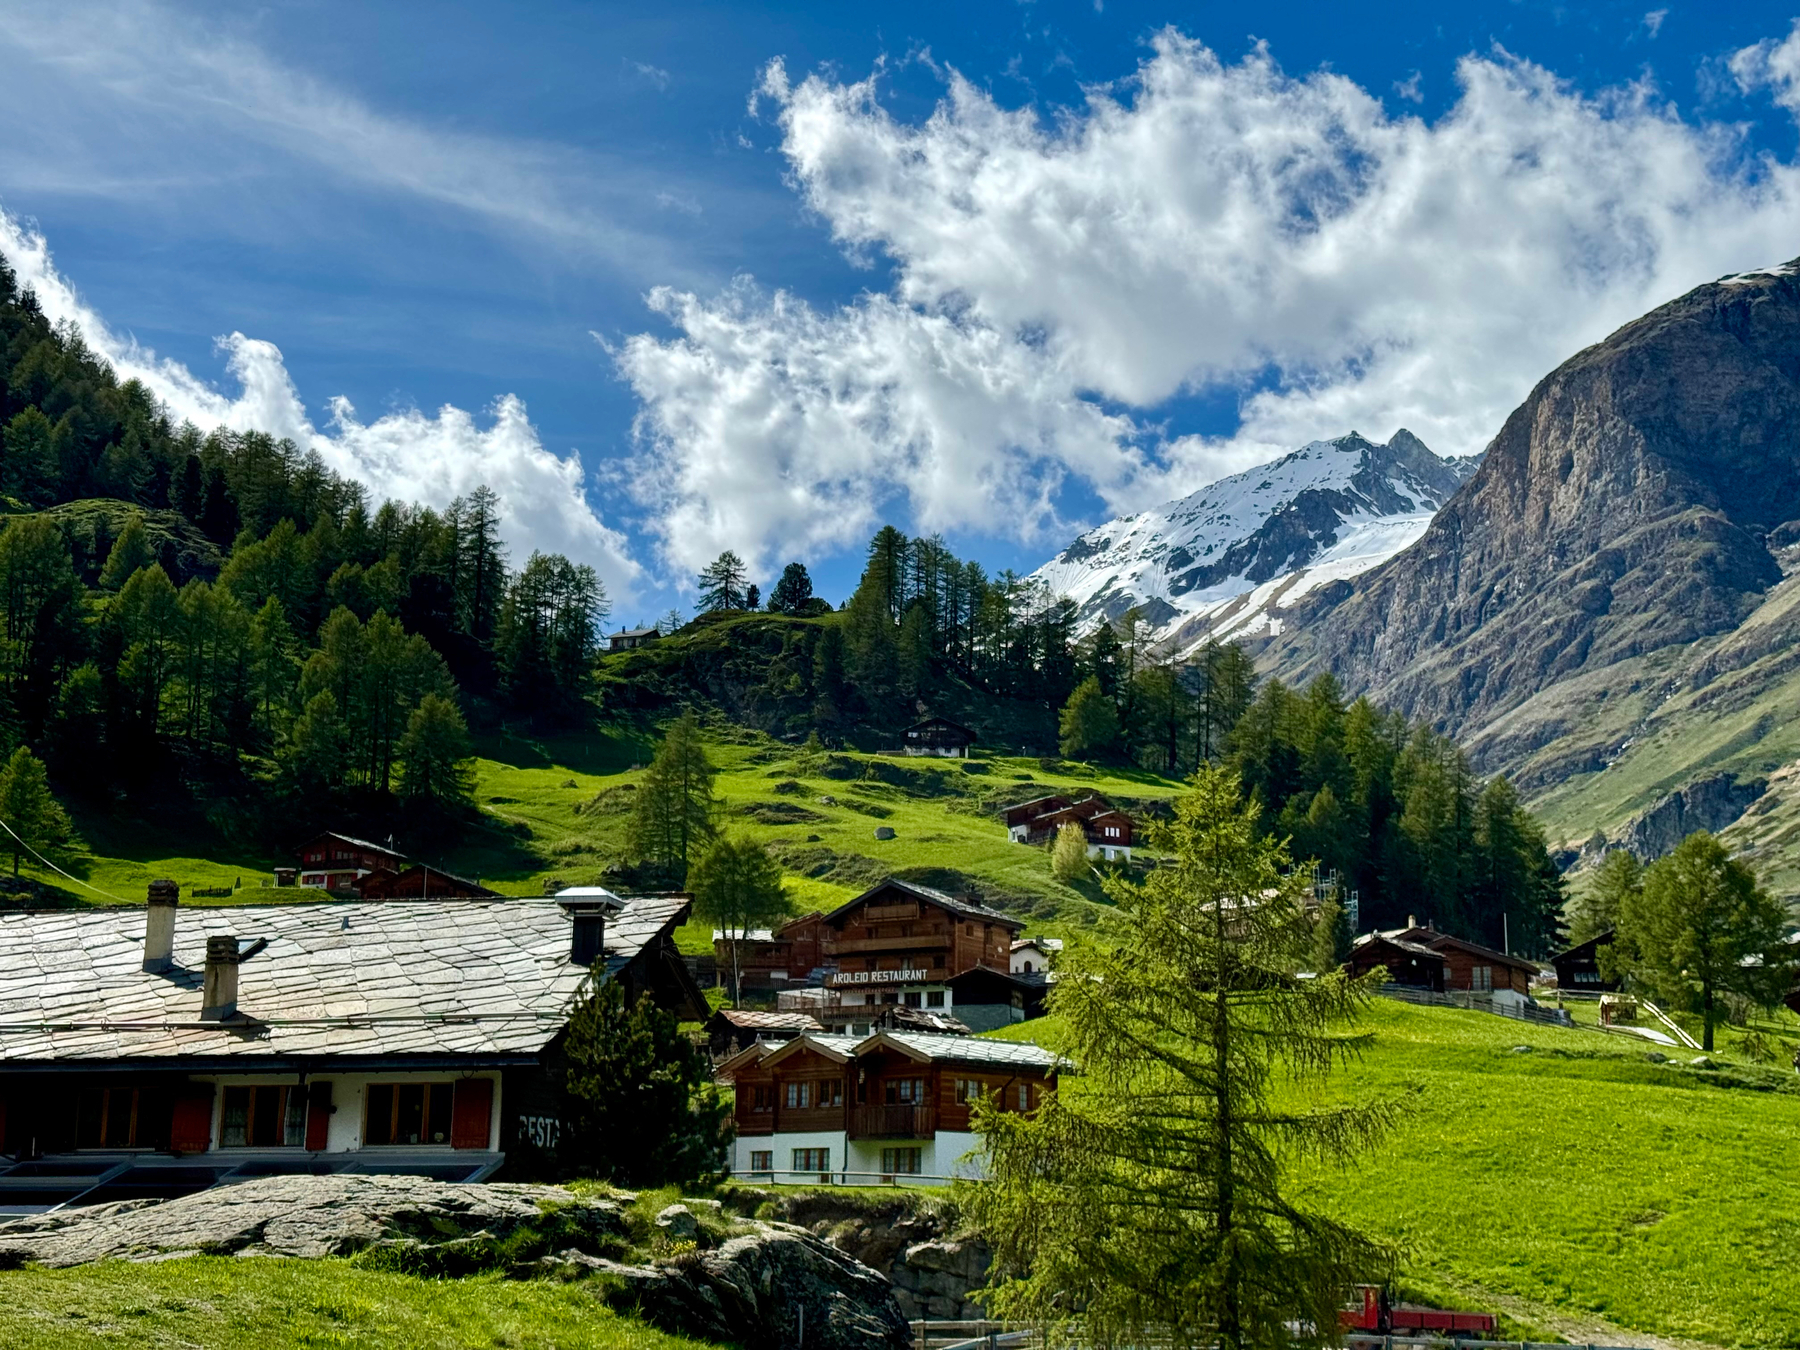 Alpine village with traditional wooden chalets, green pastures, forested slopes, and a snow-capped mountain under a blue sky scattered with clouds.